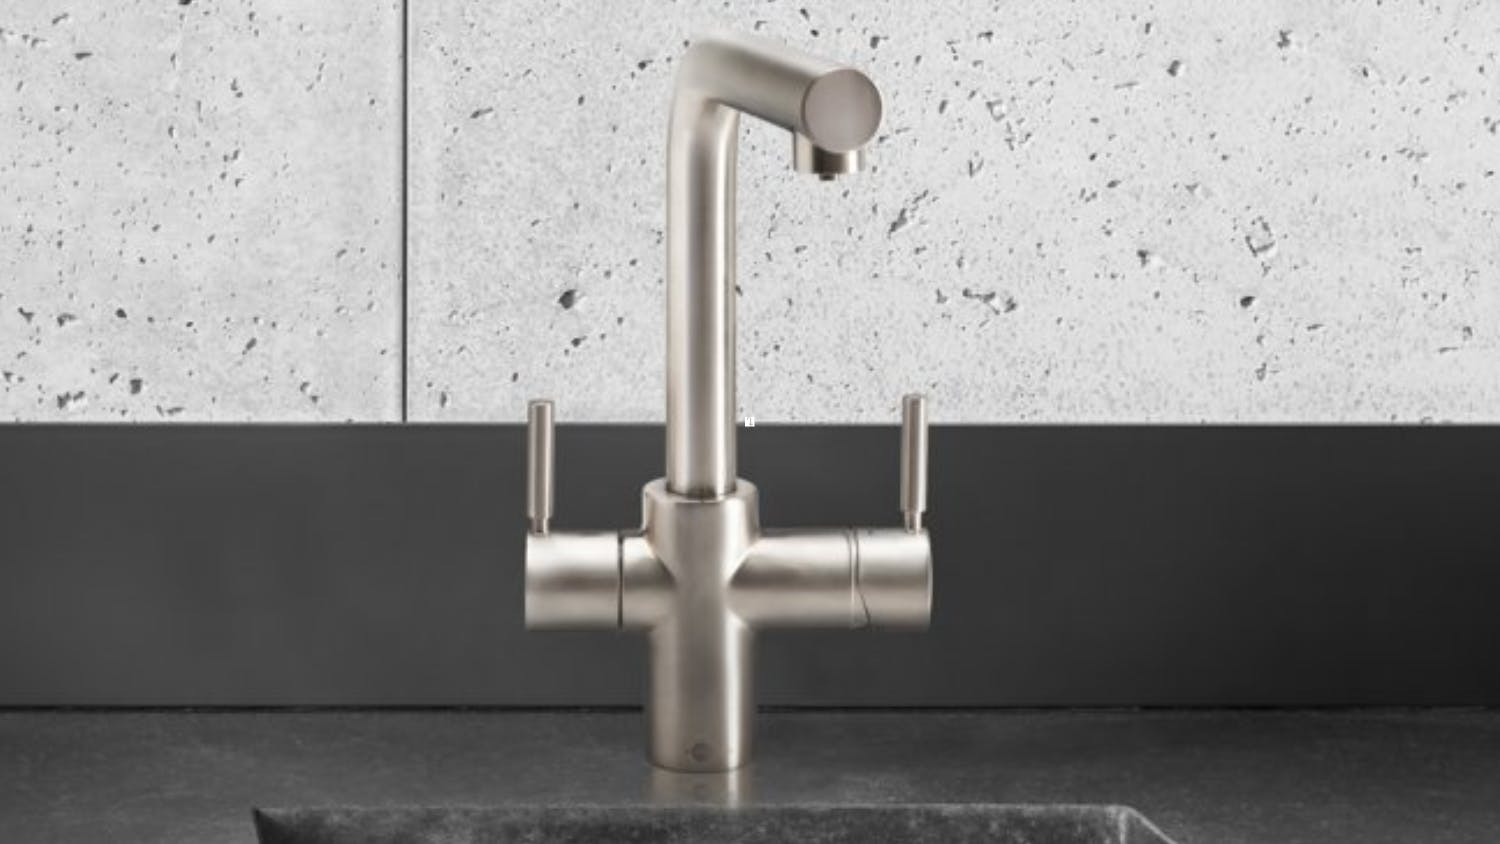 InSinkerator Near-Boiling & Cold Filtered Mixed Multi Tap - Brushed Steel (Lia/MTLIA-BR)